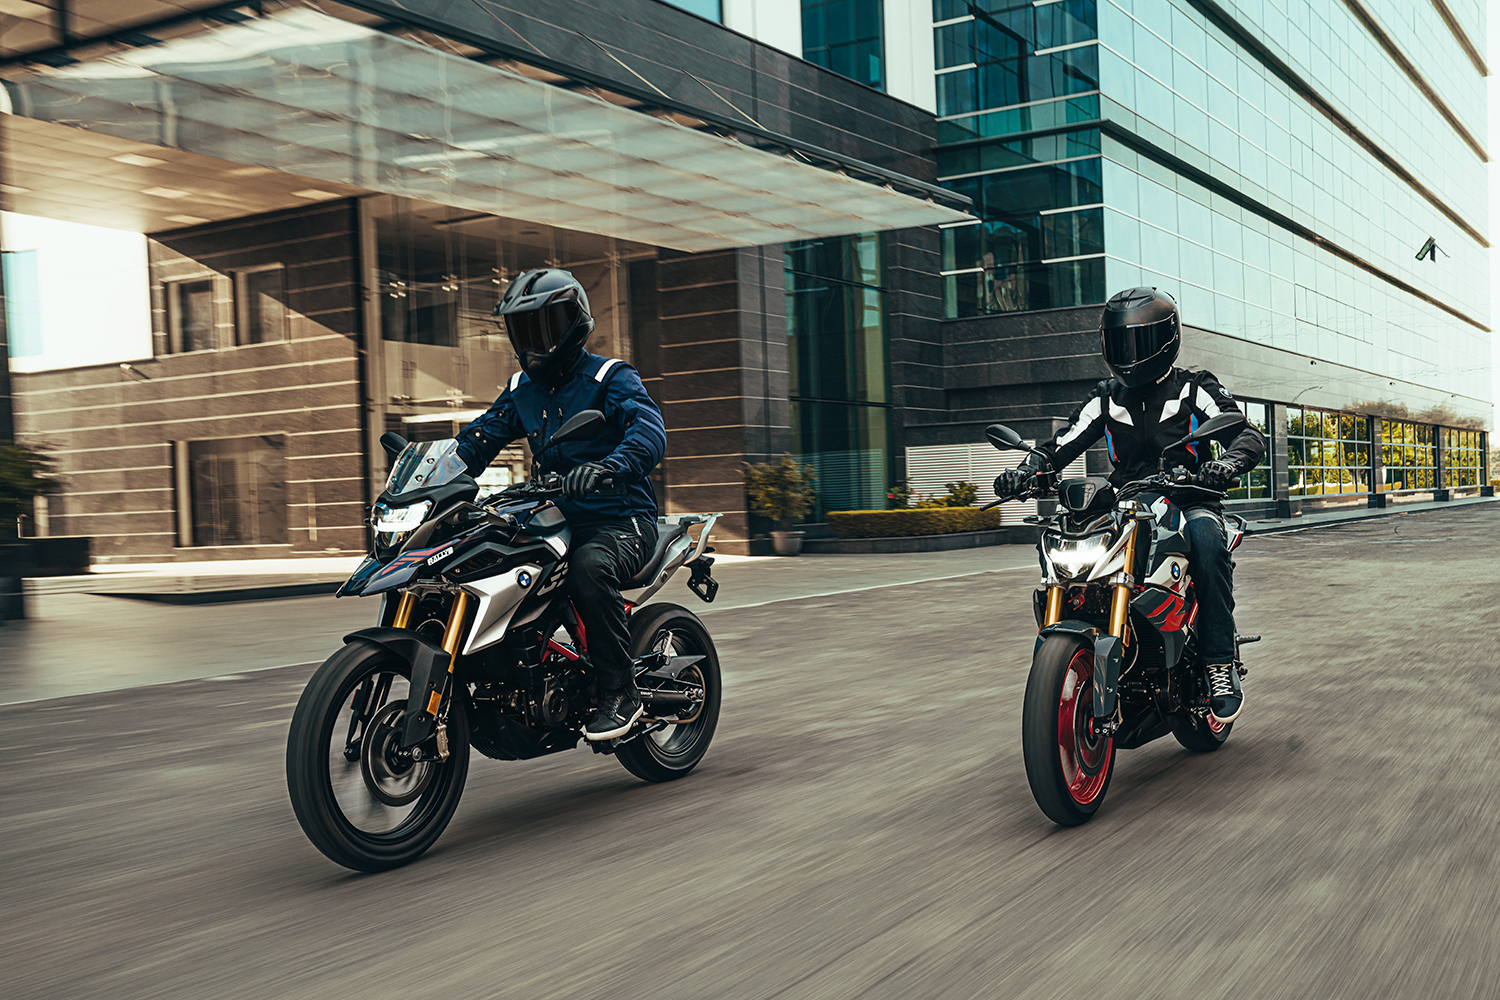 BMW G 310 R and BMW G 310 GS